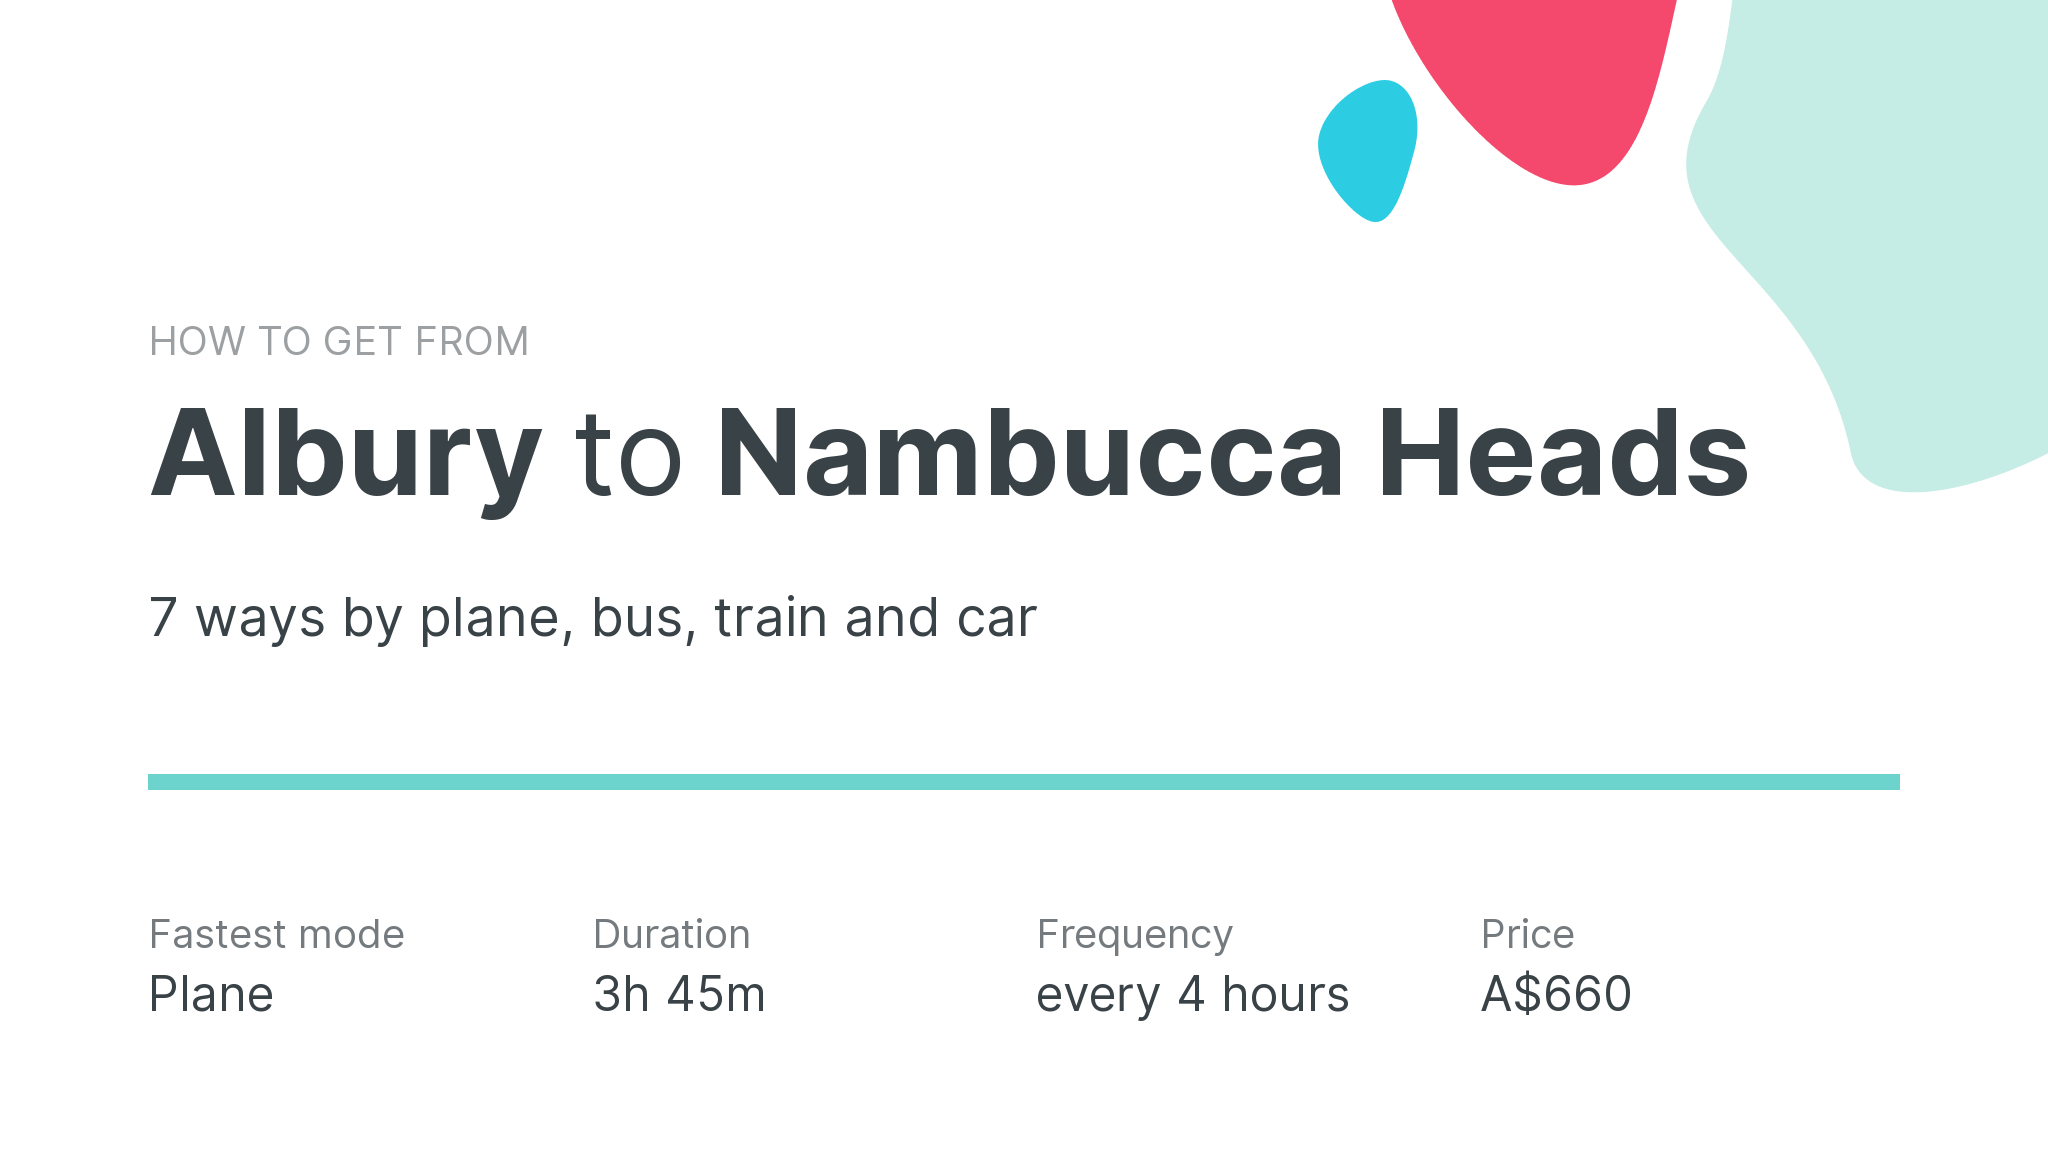 How do I get from Albury to Nambucca Heads